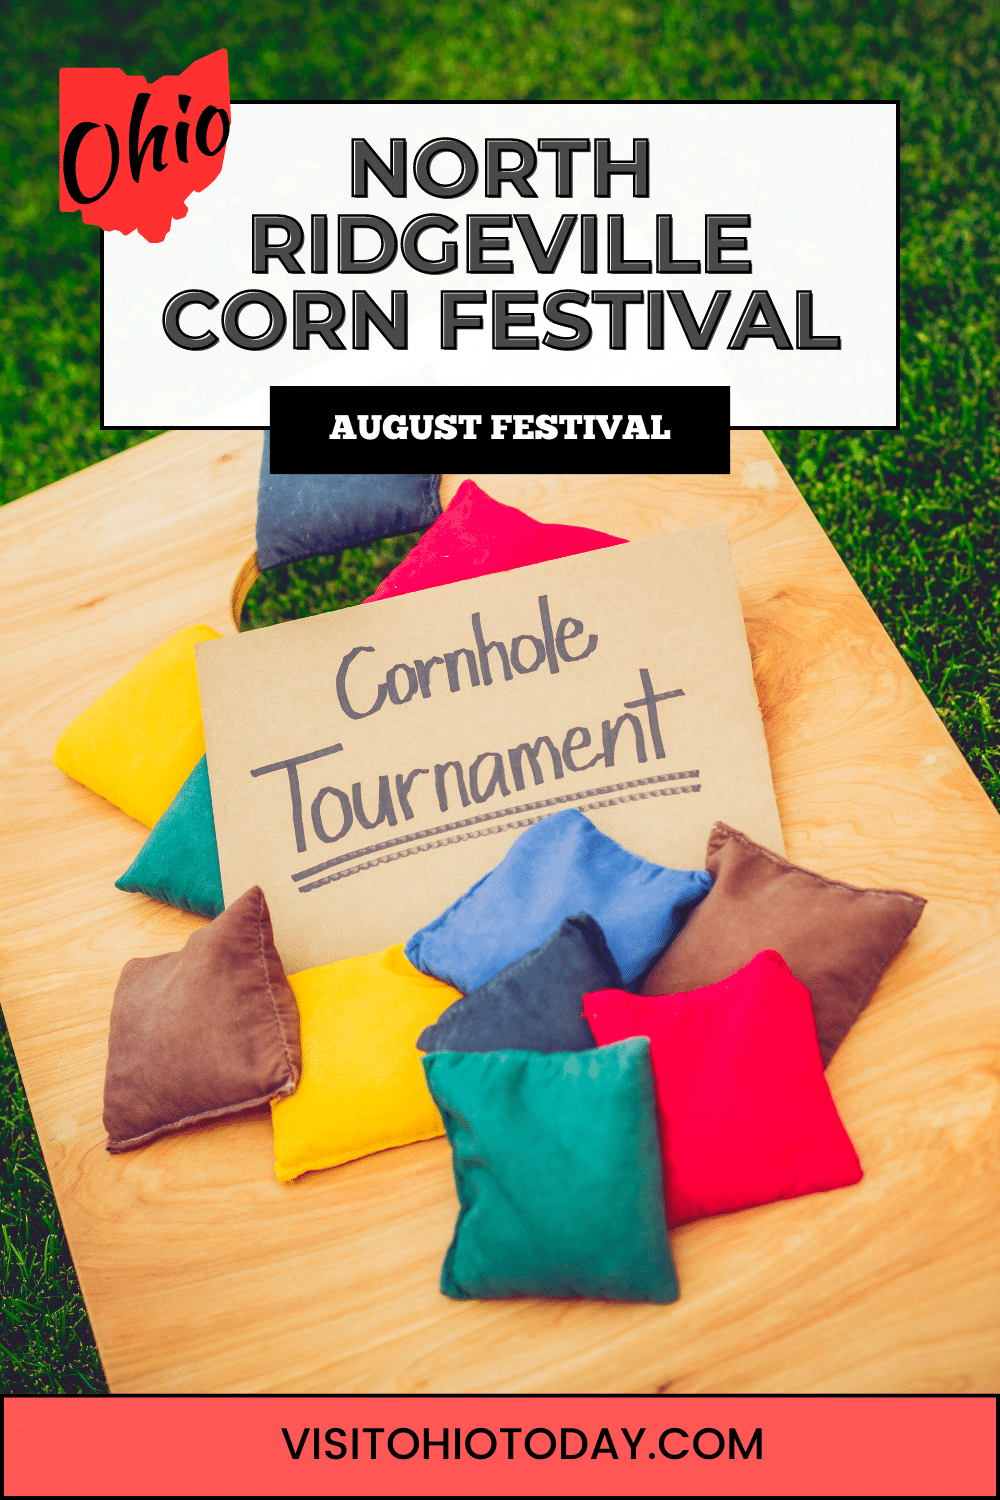 North Ridgeville Corn Festival is an annual summertime weekend event that takes place in mid-August at South Central Park in North Ridgeville.